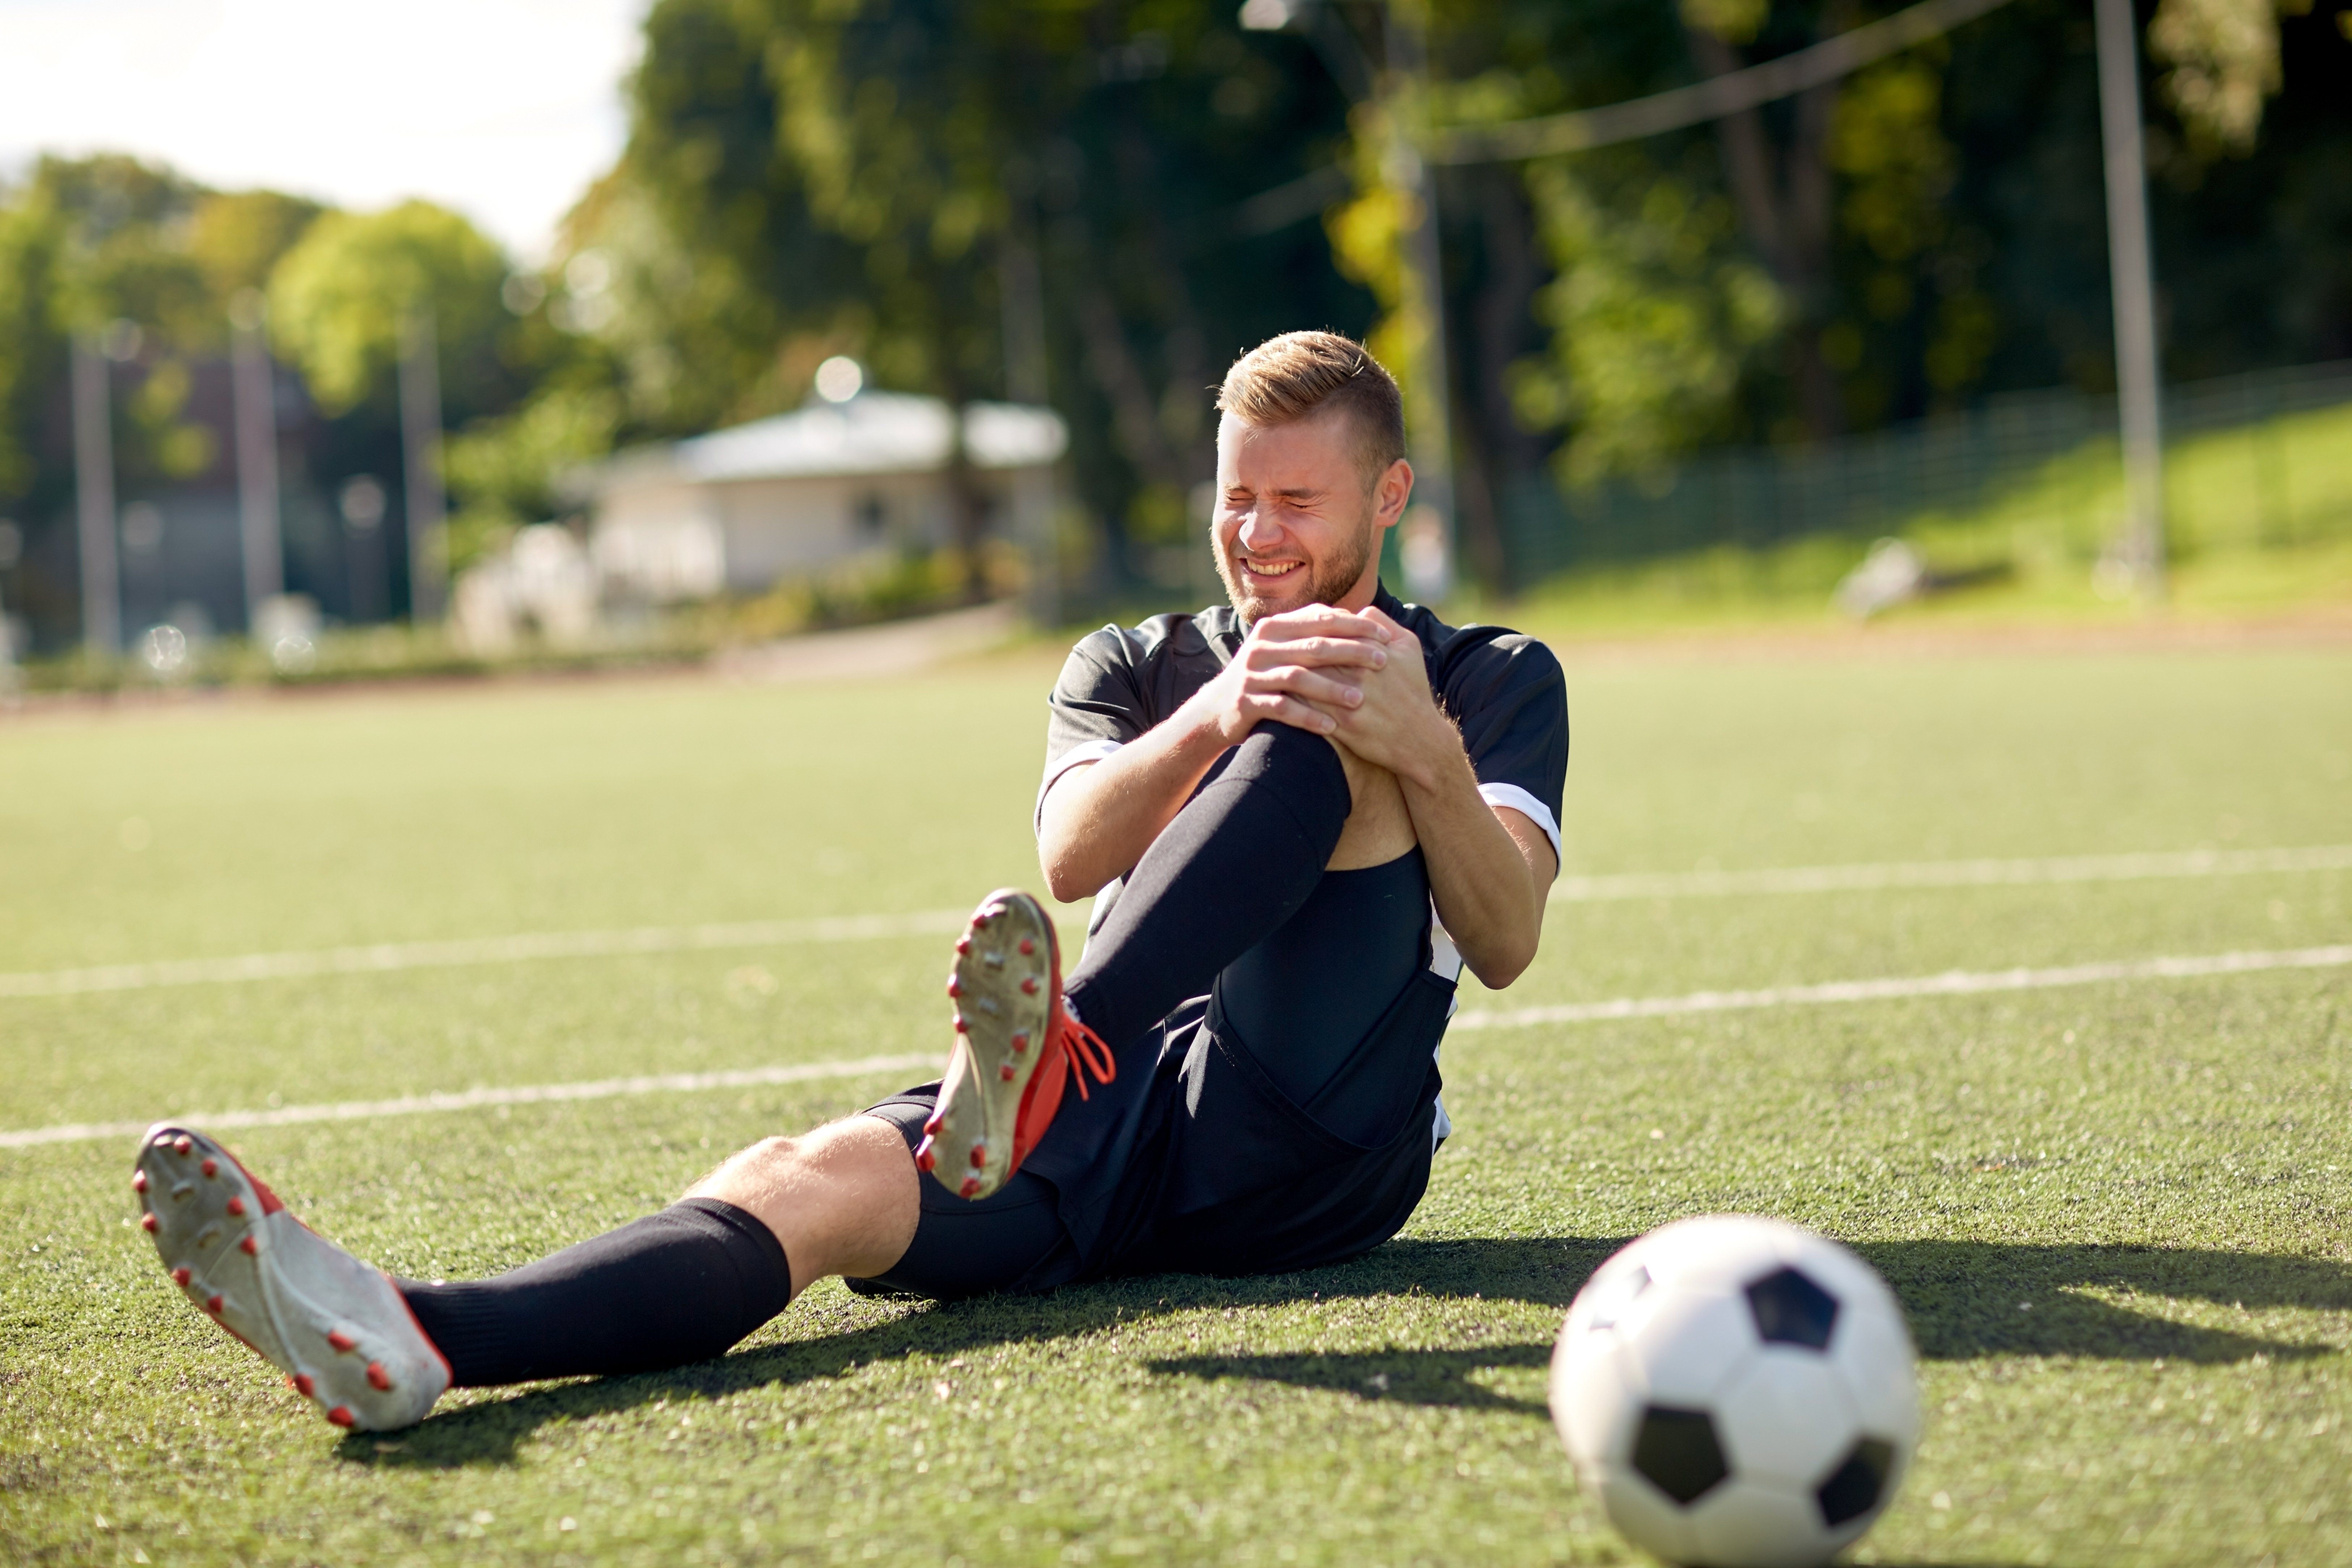 Is Chiropractic Care Good for Sports Injury?